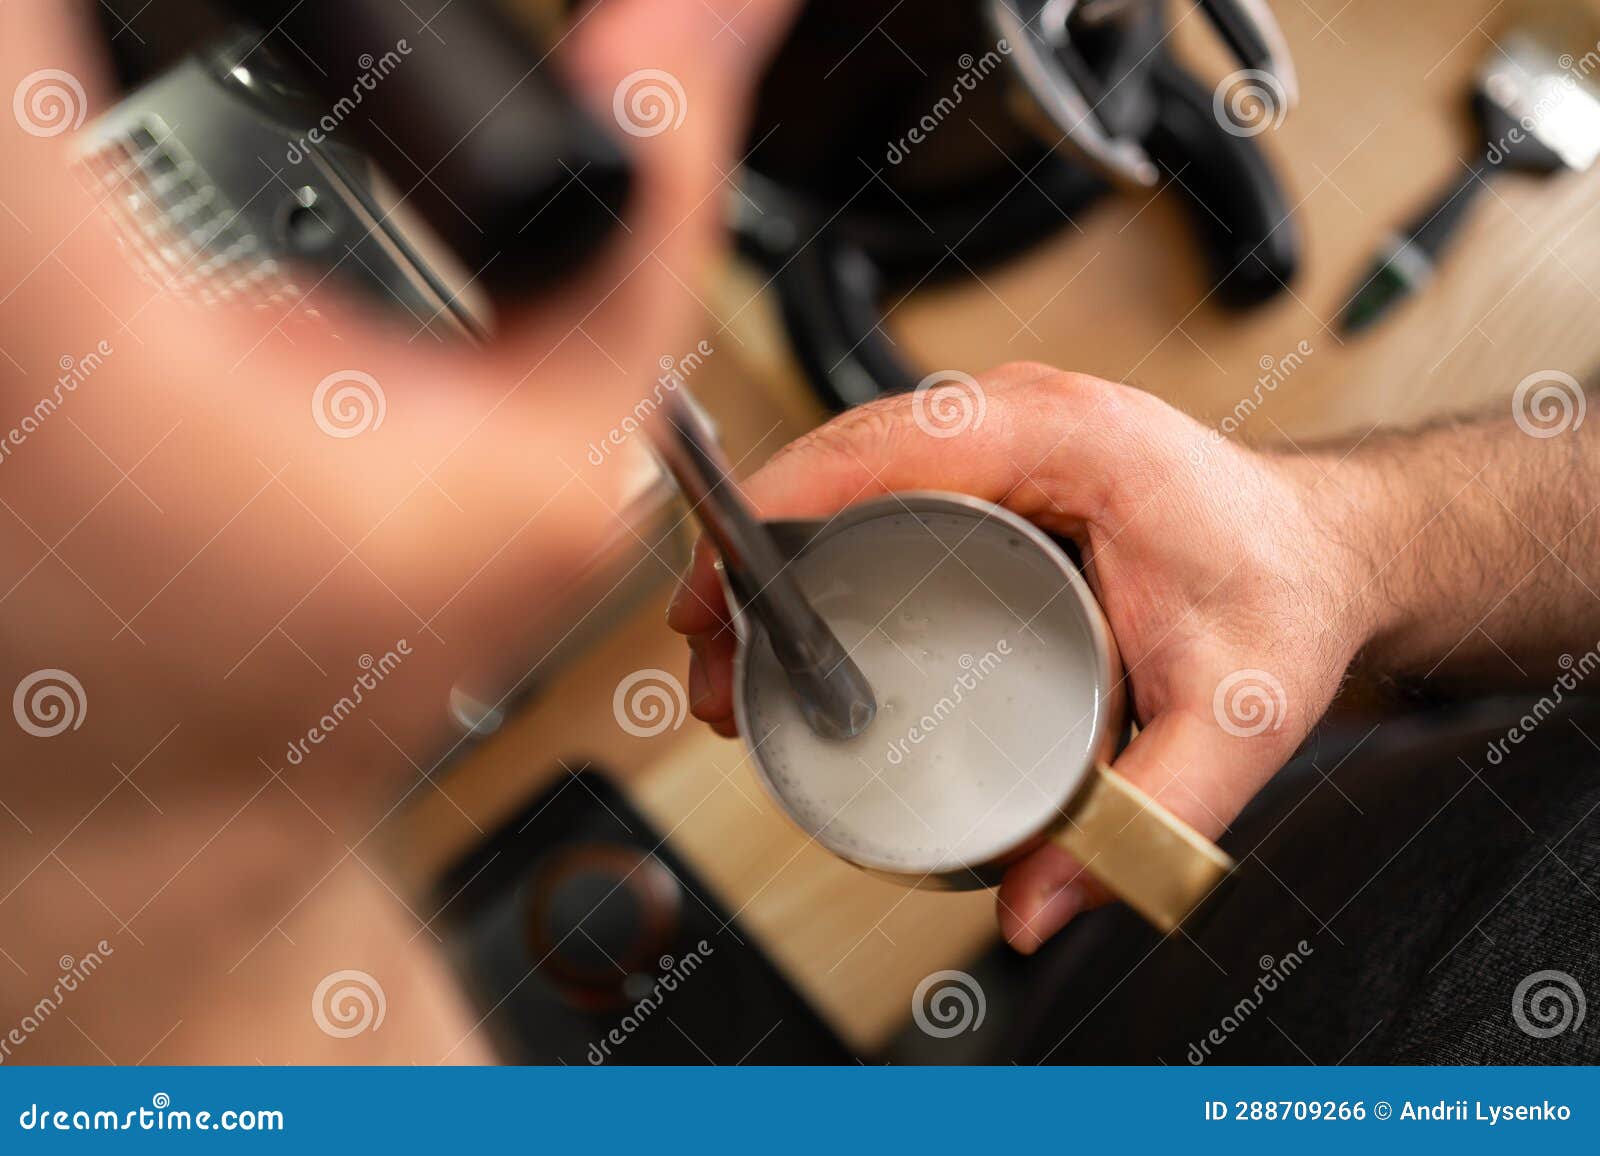 male barista froths milk on a coffee machine for making cappuccino or latte. concept of making drinks from natural